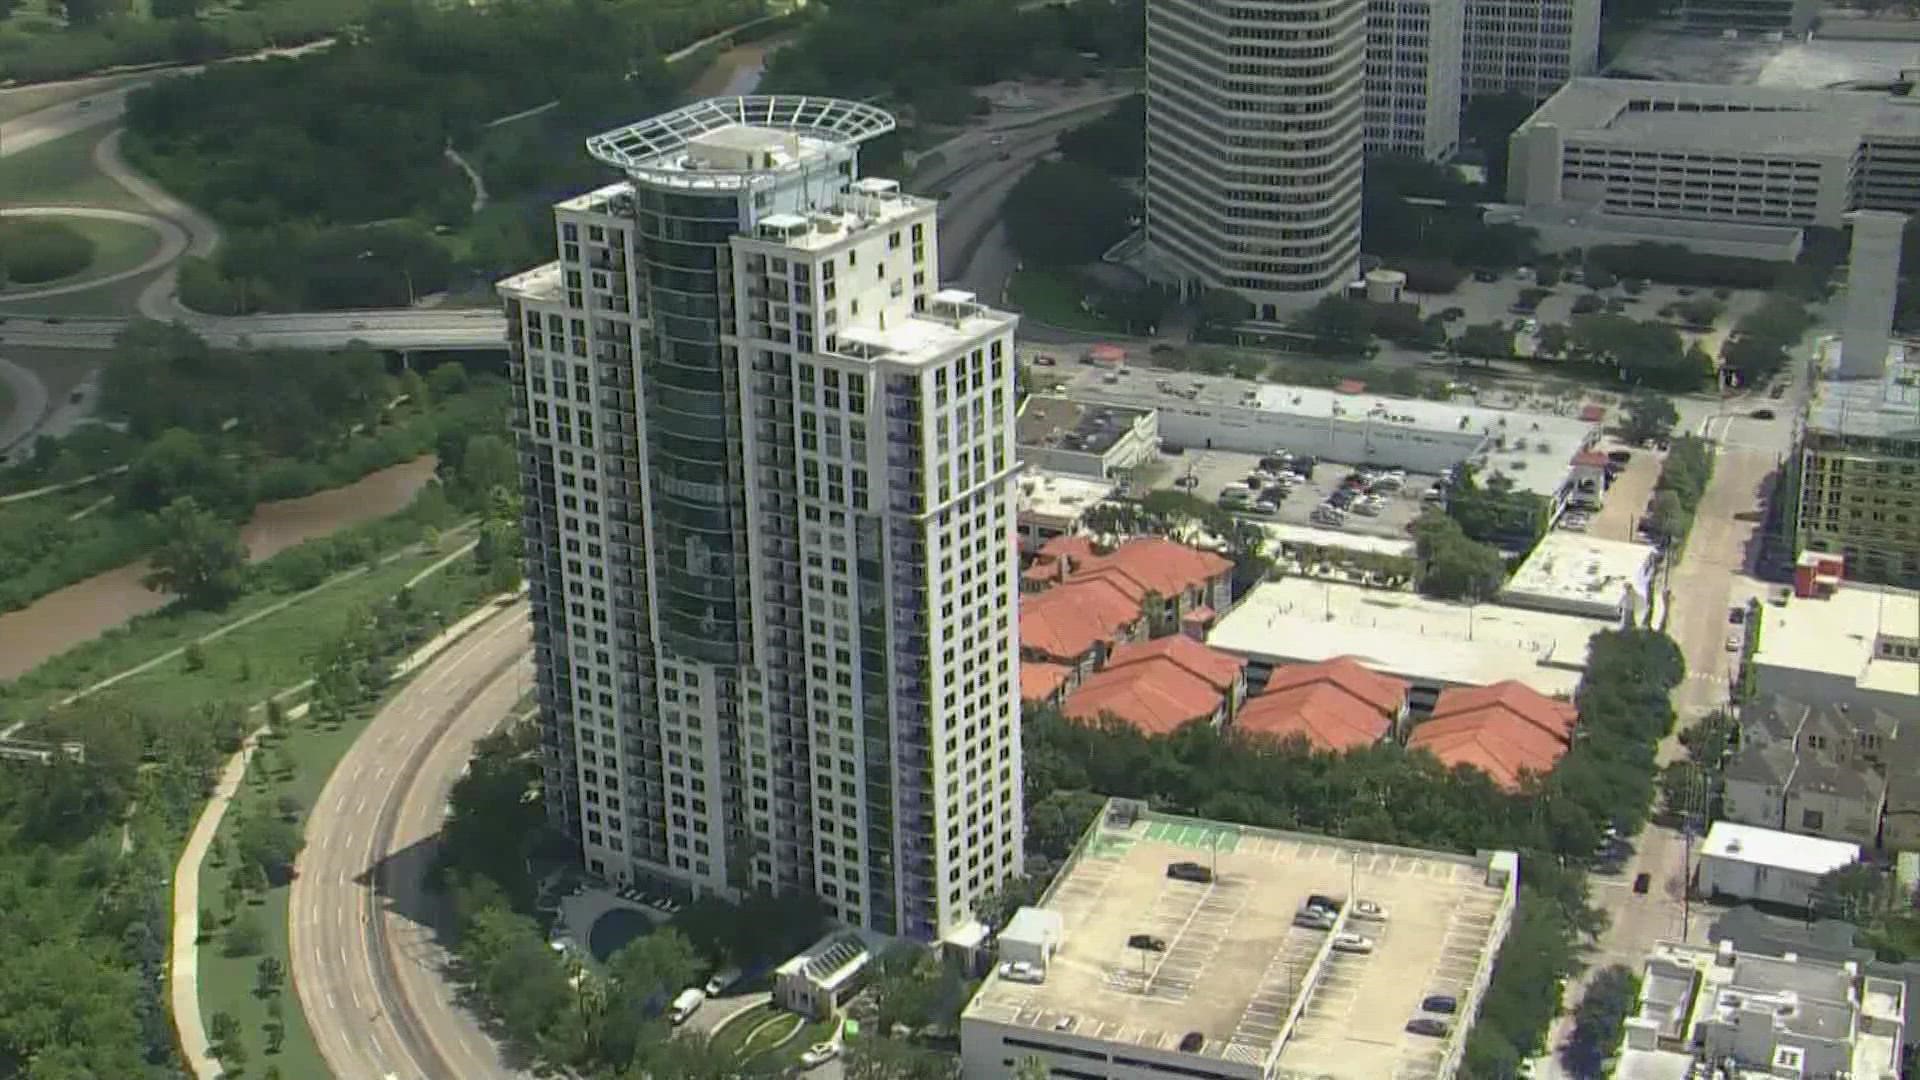 The City of Houston has pulled the occupancy permit of a high-rise where hundreds of residents had to be evacuated over safety concerns.